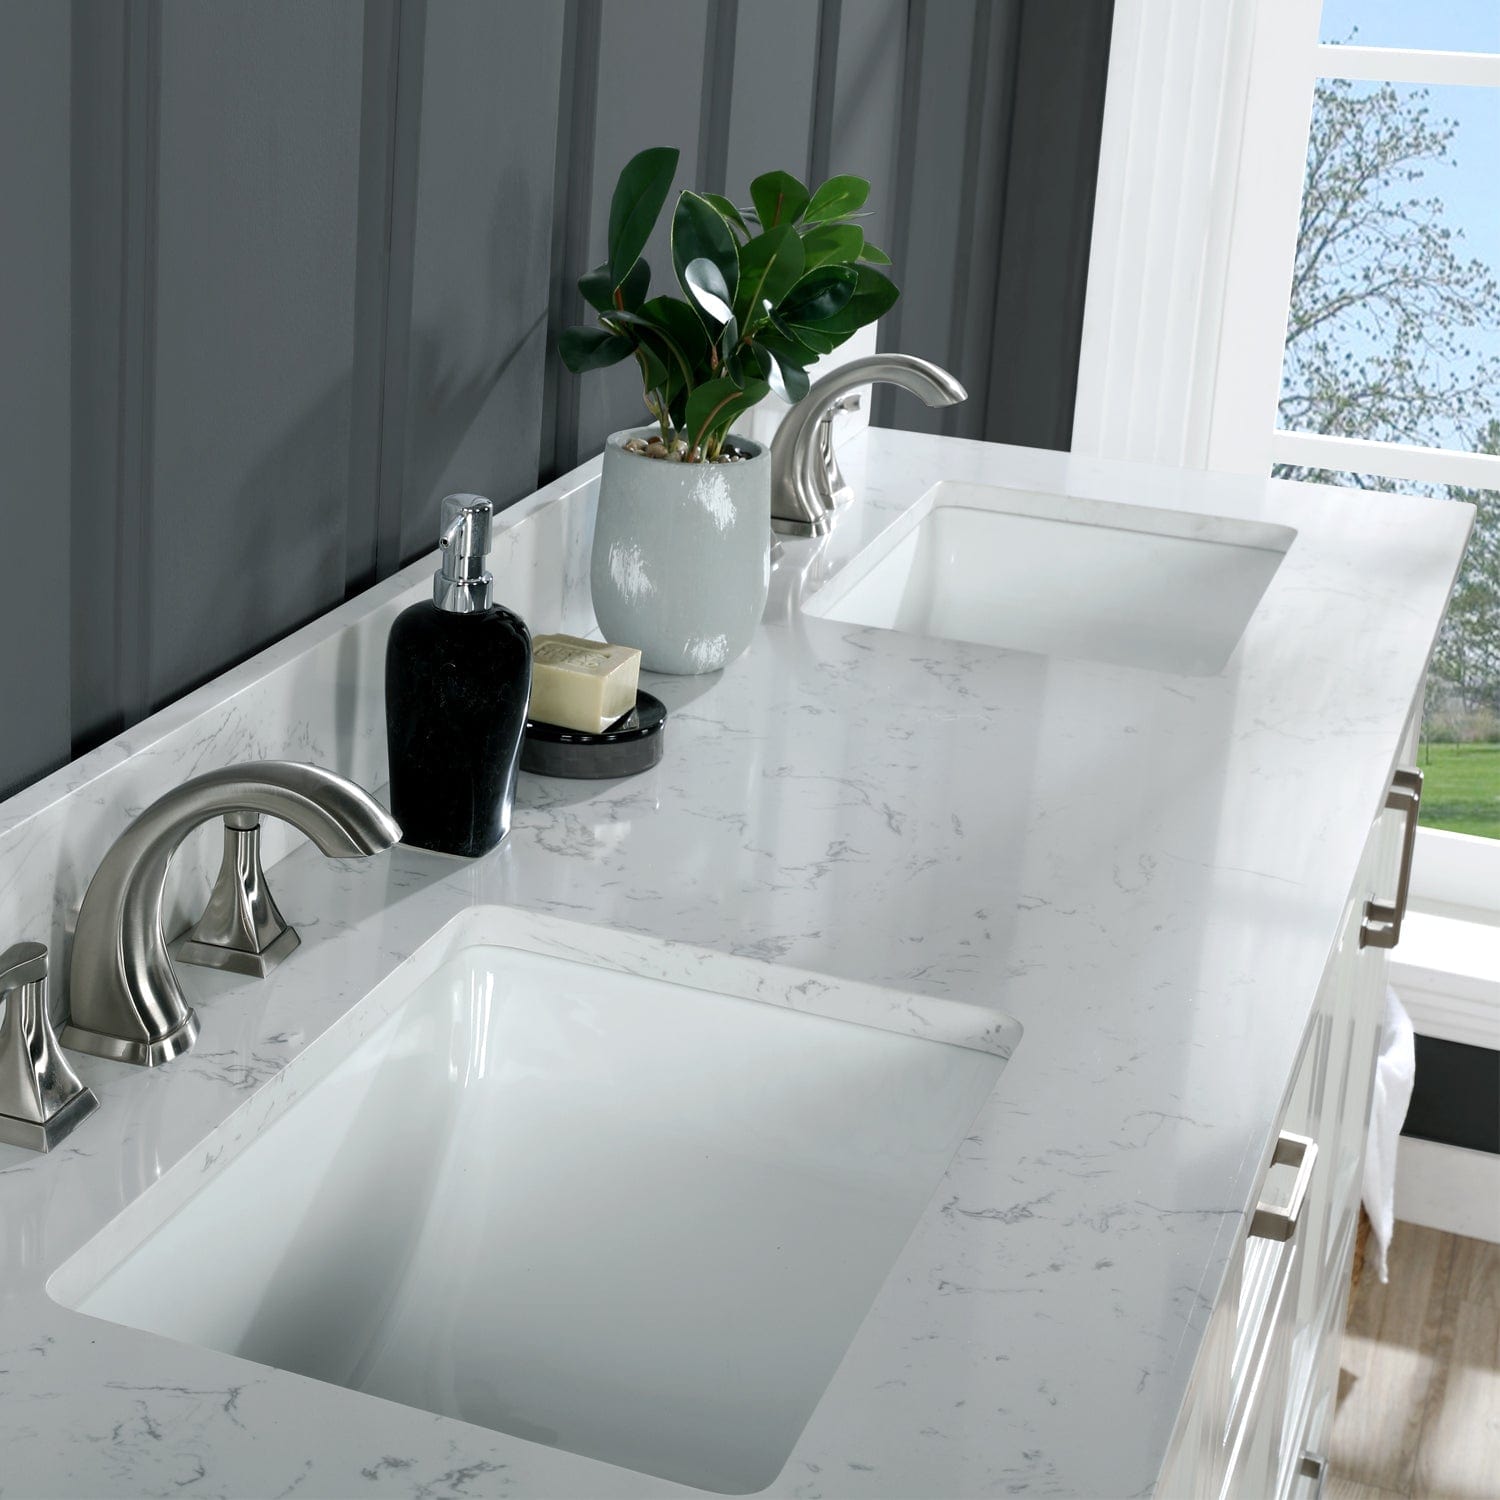 Altair Isla 72" Double Bathroom Vanity Set in White and Carrara White Marble Countertop without Mirror 538072-WH-AW-NM - Molaix696952511383Vanity538072-WH-AW-NM